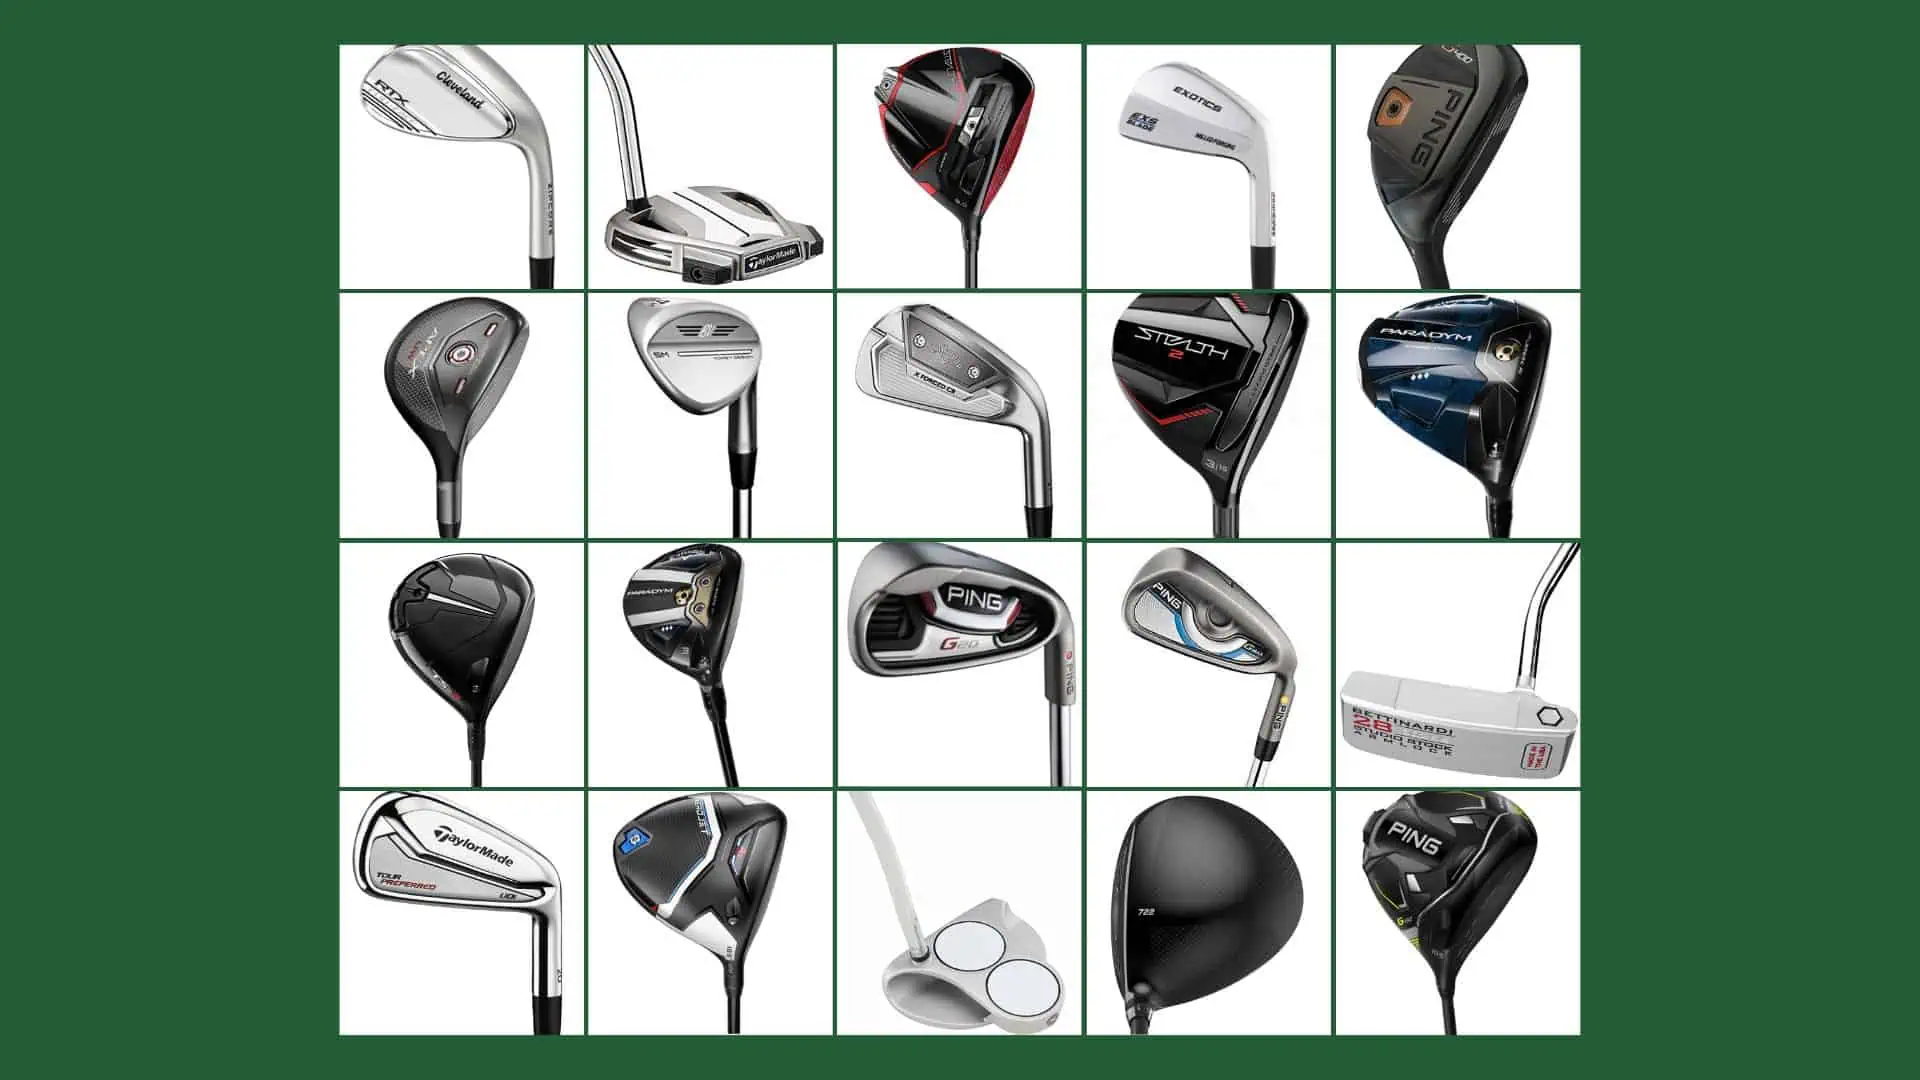 Golf clubs that pros use shown in a collage.